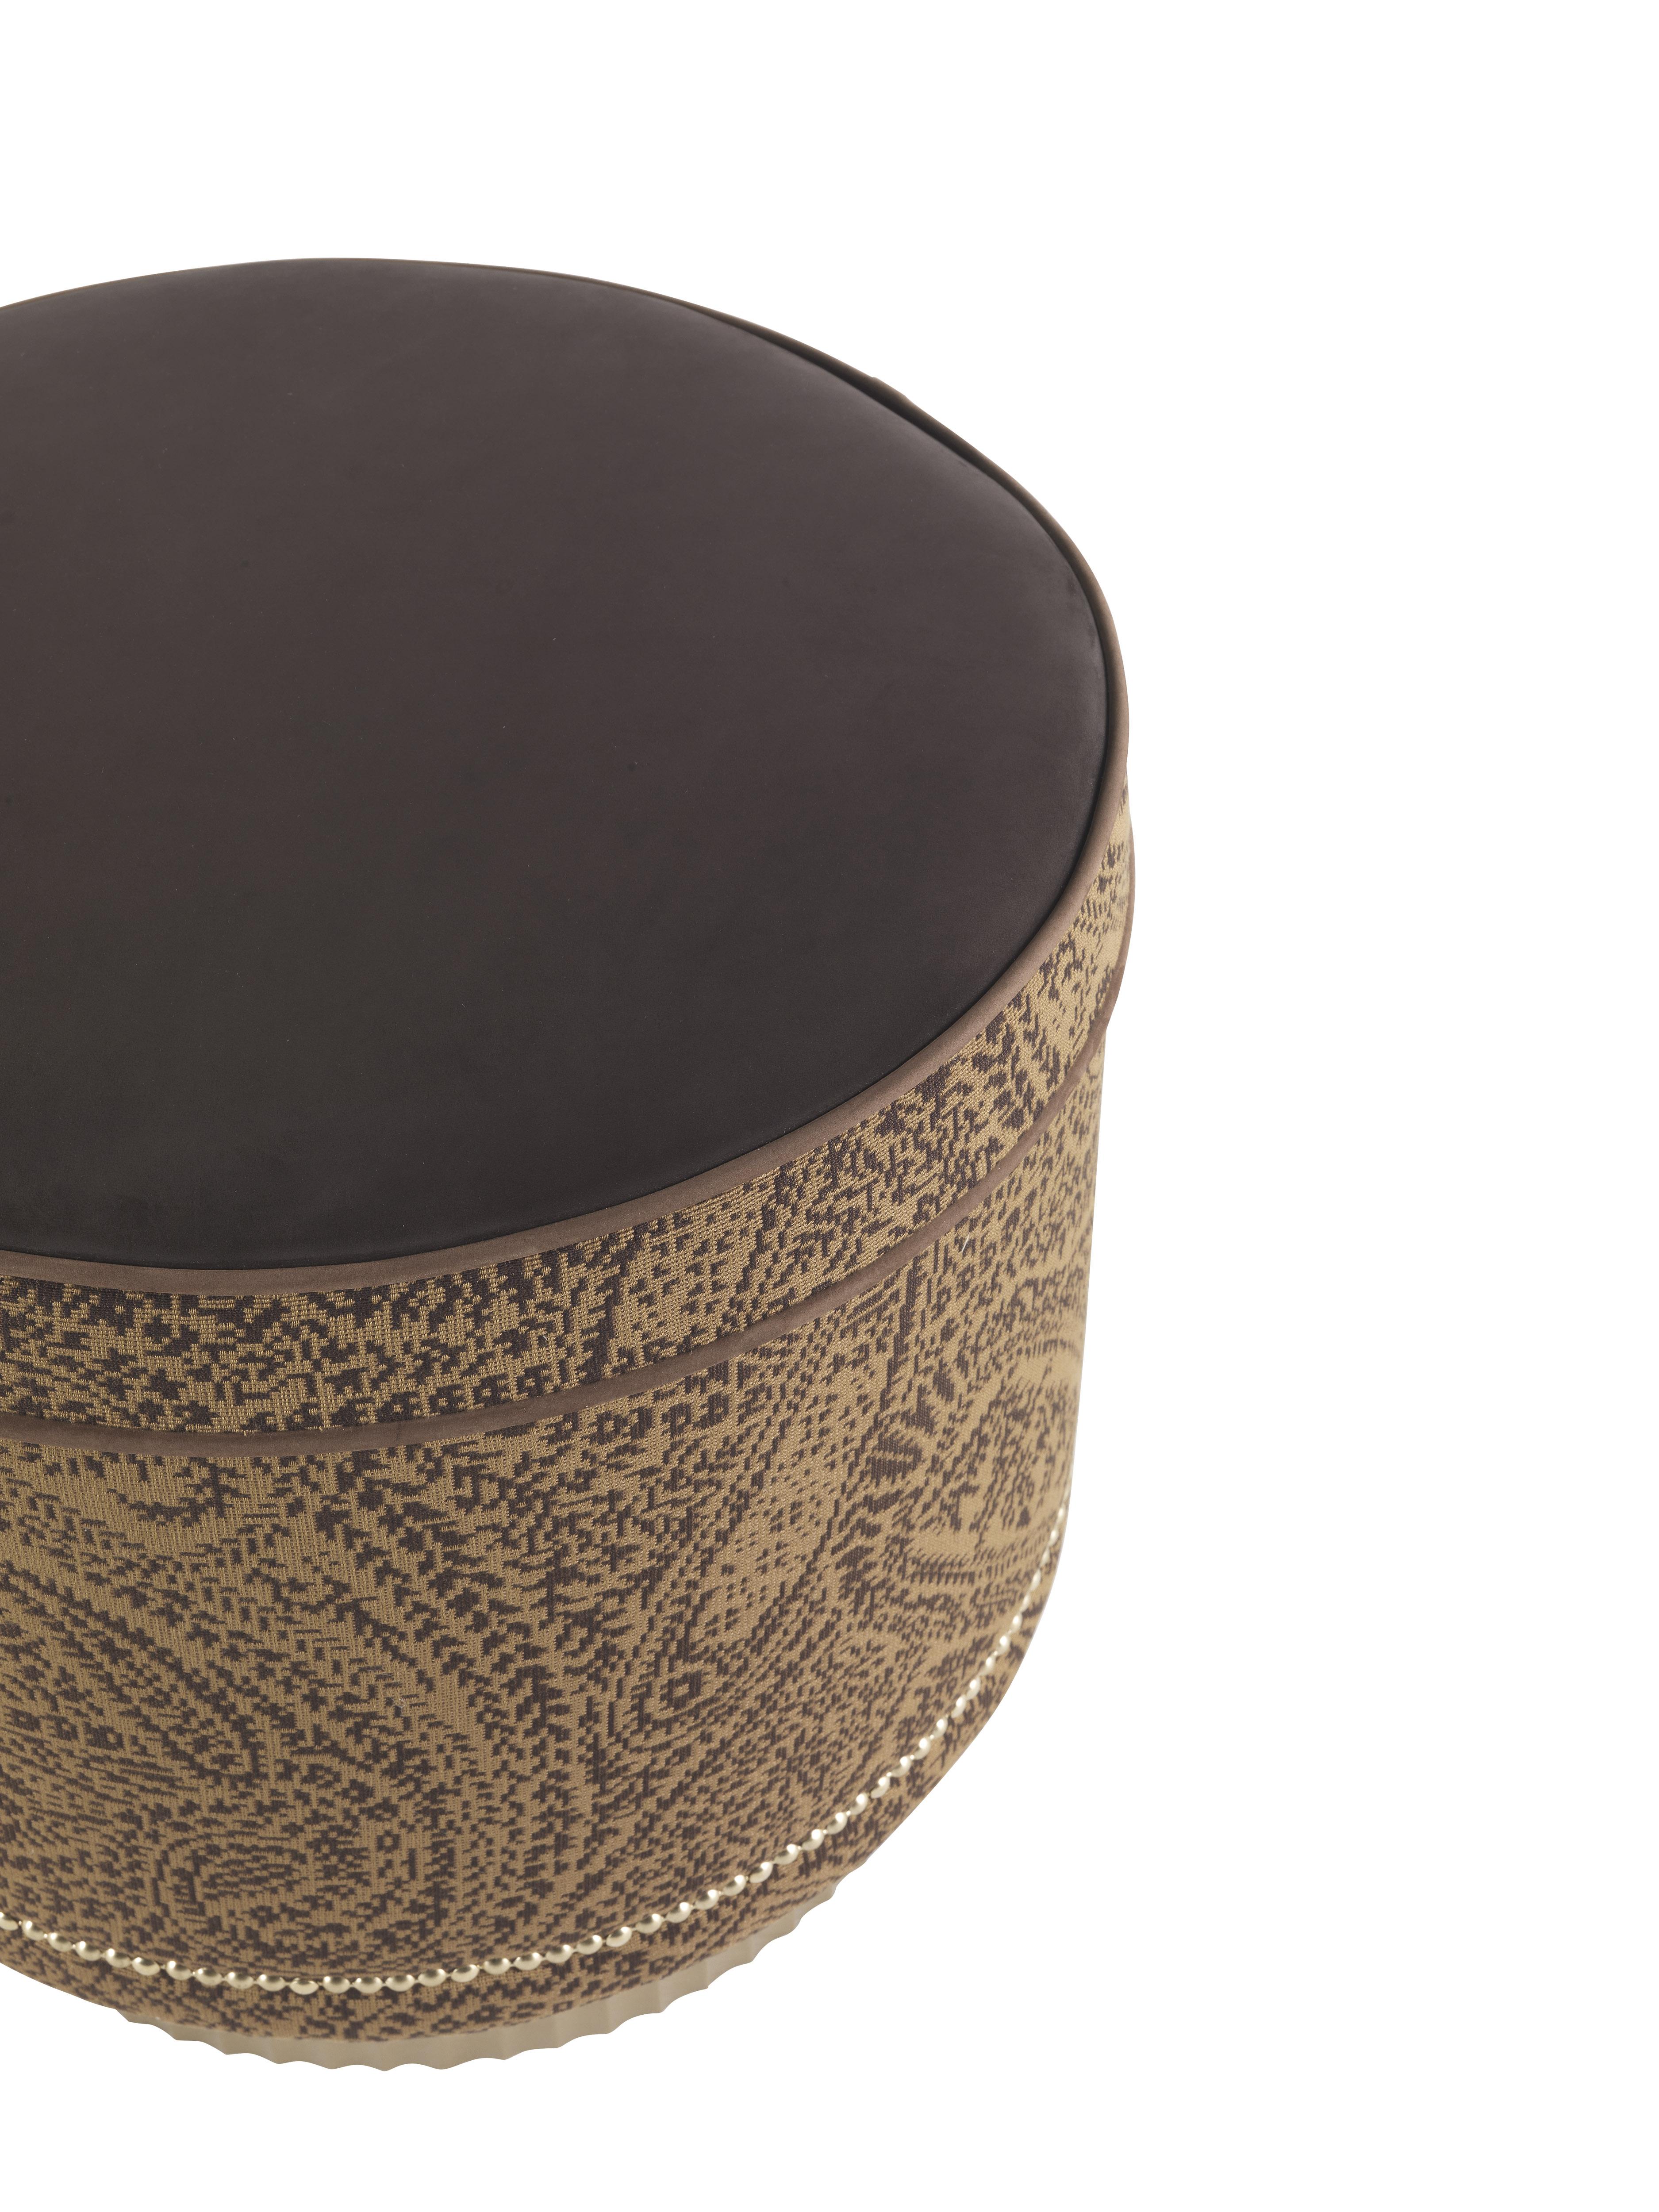 MERIAM Pouf with Structure in wood and foam. Sides in fabric cat. A Zulu col. 1 Tobacco. Seat leather cat. A Nuuk col. 1 Brown. Piping leather Nuuk col. 3 Nut. Ornamental golden nails on the bottom. Pleated base in gold lacquered wood.